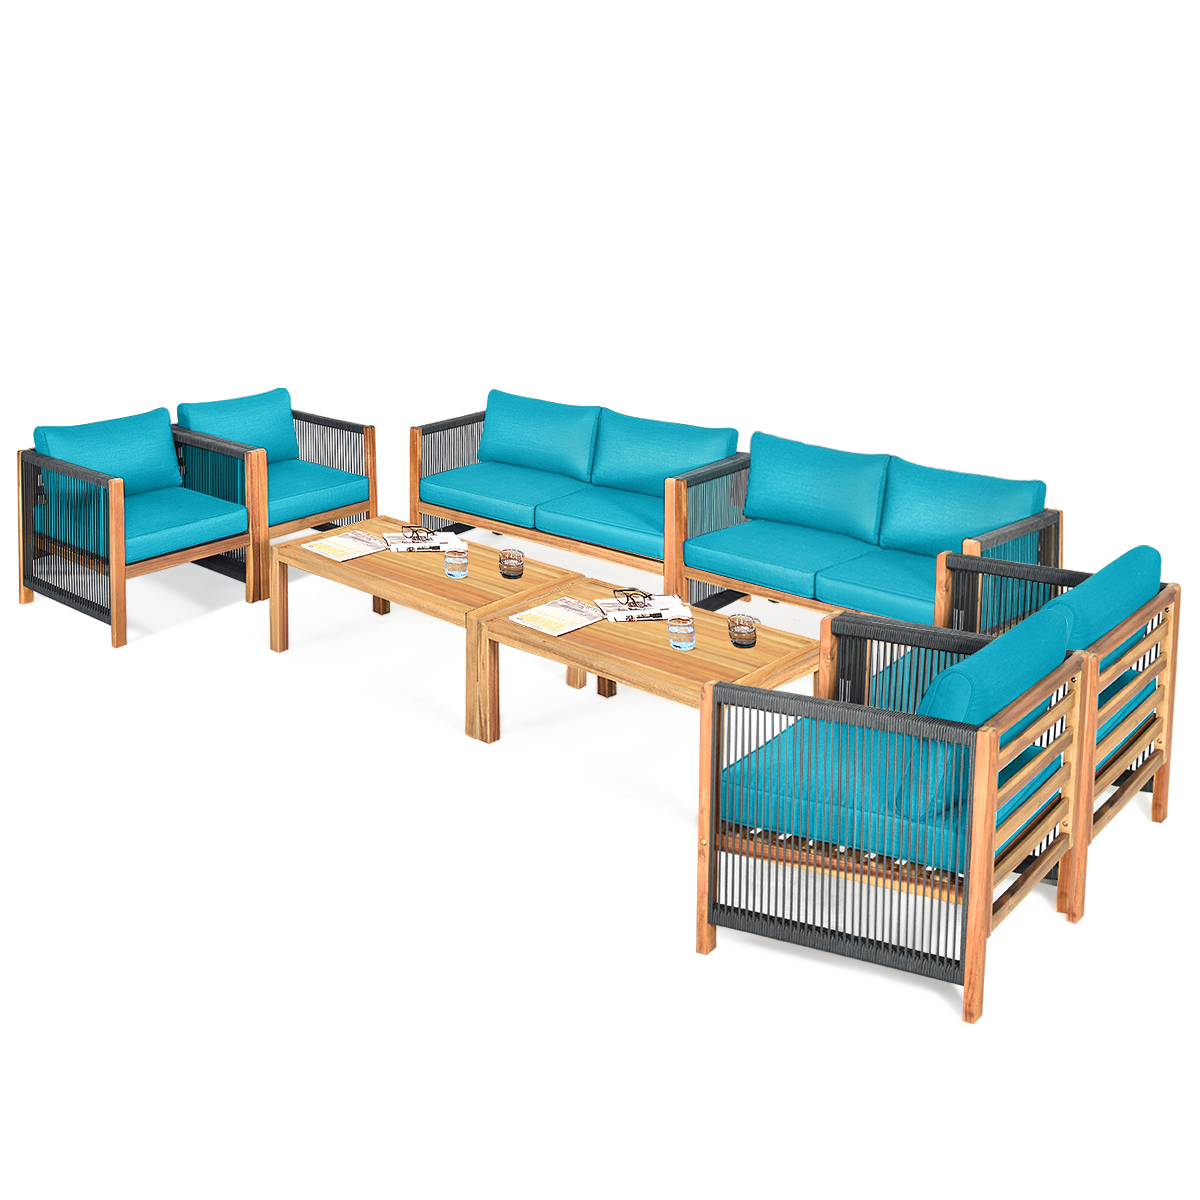 Patiojoy 8-Piece Outdoor Patio Wood Conversation Furniture Set Padded Chair with Coffee Table Turquoise - image 1 of 5